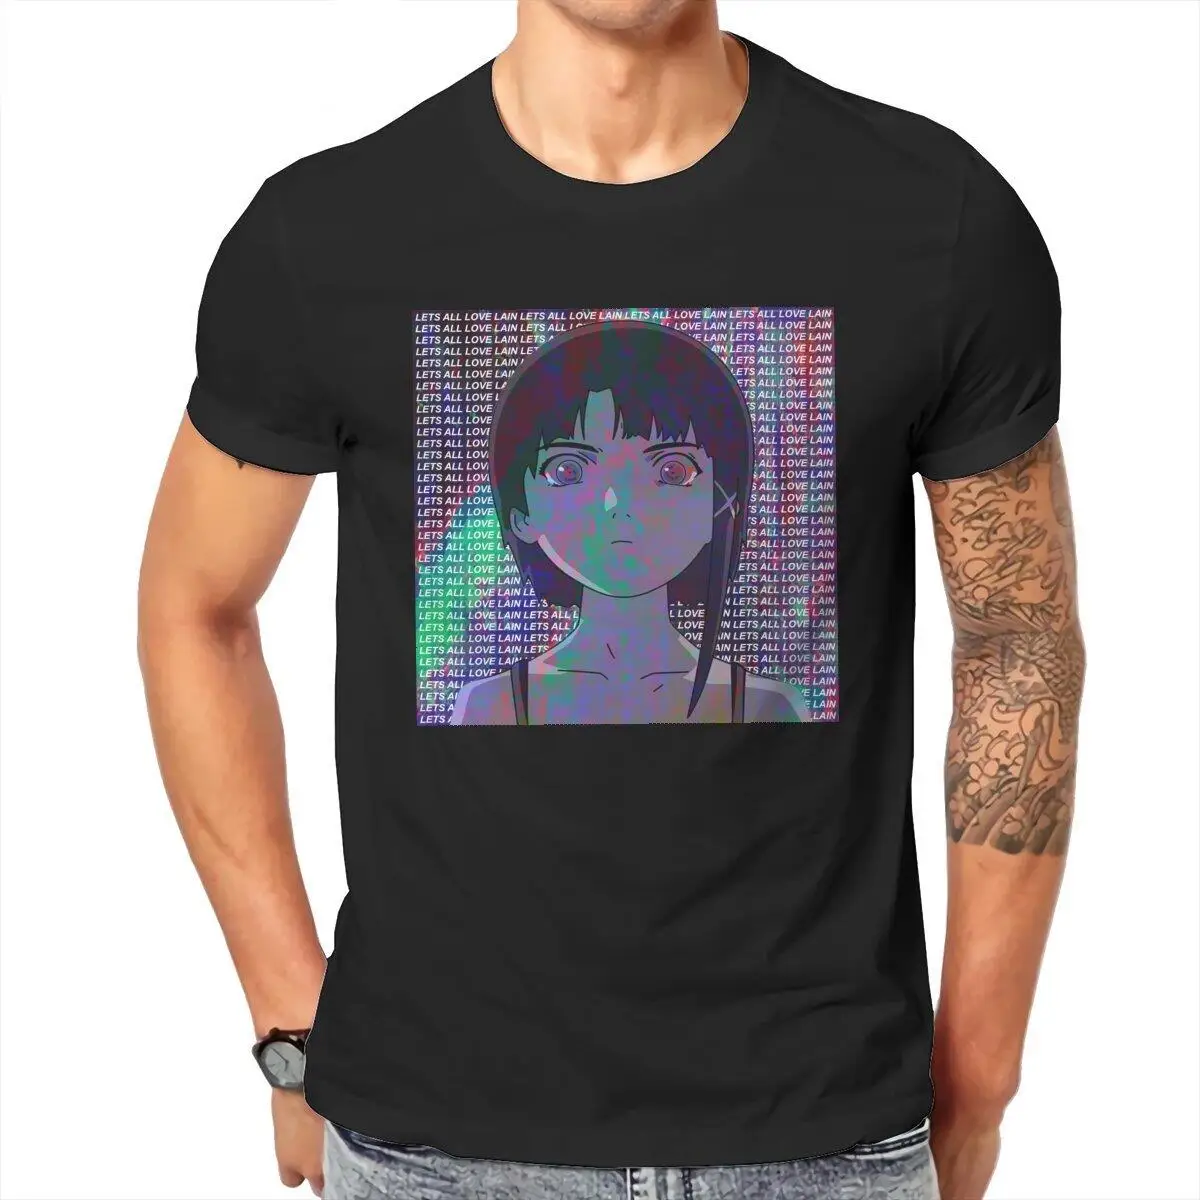 Men's T-Shirts Serial Experiments Lain Aesthetic  Fun 100% Cotton Tees Japanese Anime T Shirt Clothes Birthday Present